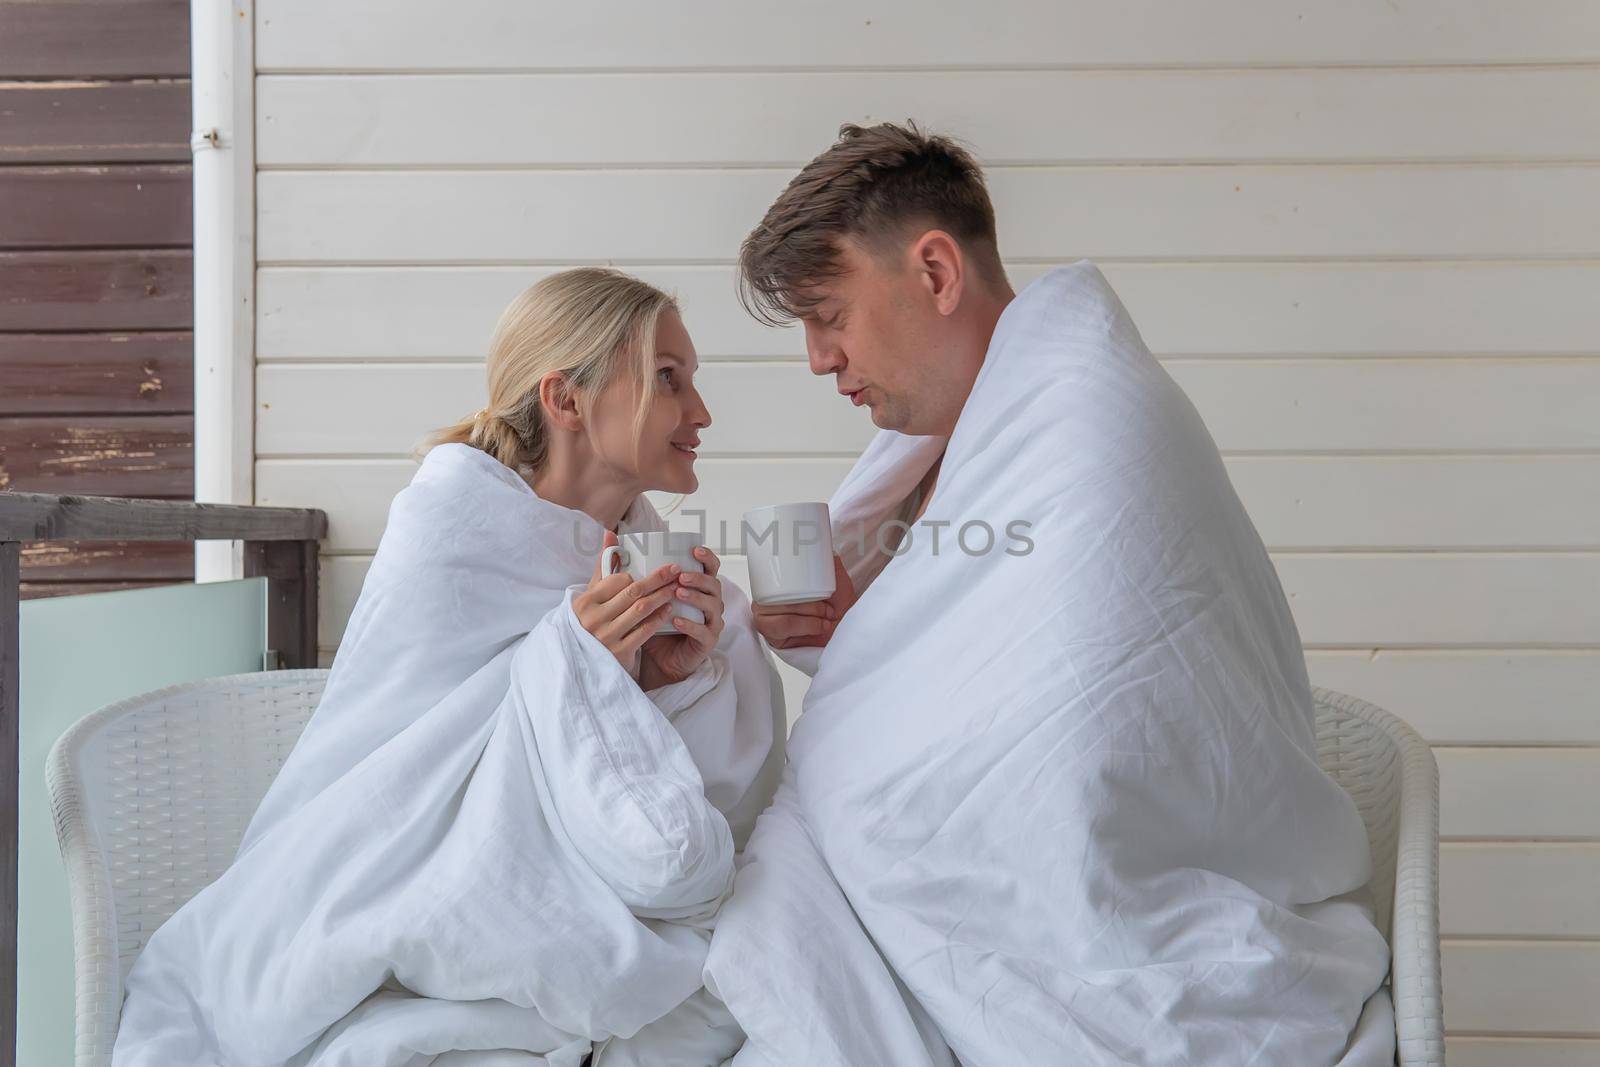 Happy blanket couple drink girl guy cute married forest enjoy, for warmth romantic in rest from lifestyle cozy, bedroom affection. Women wife valentine,